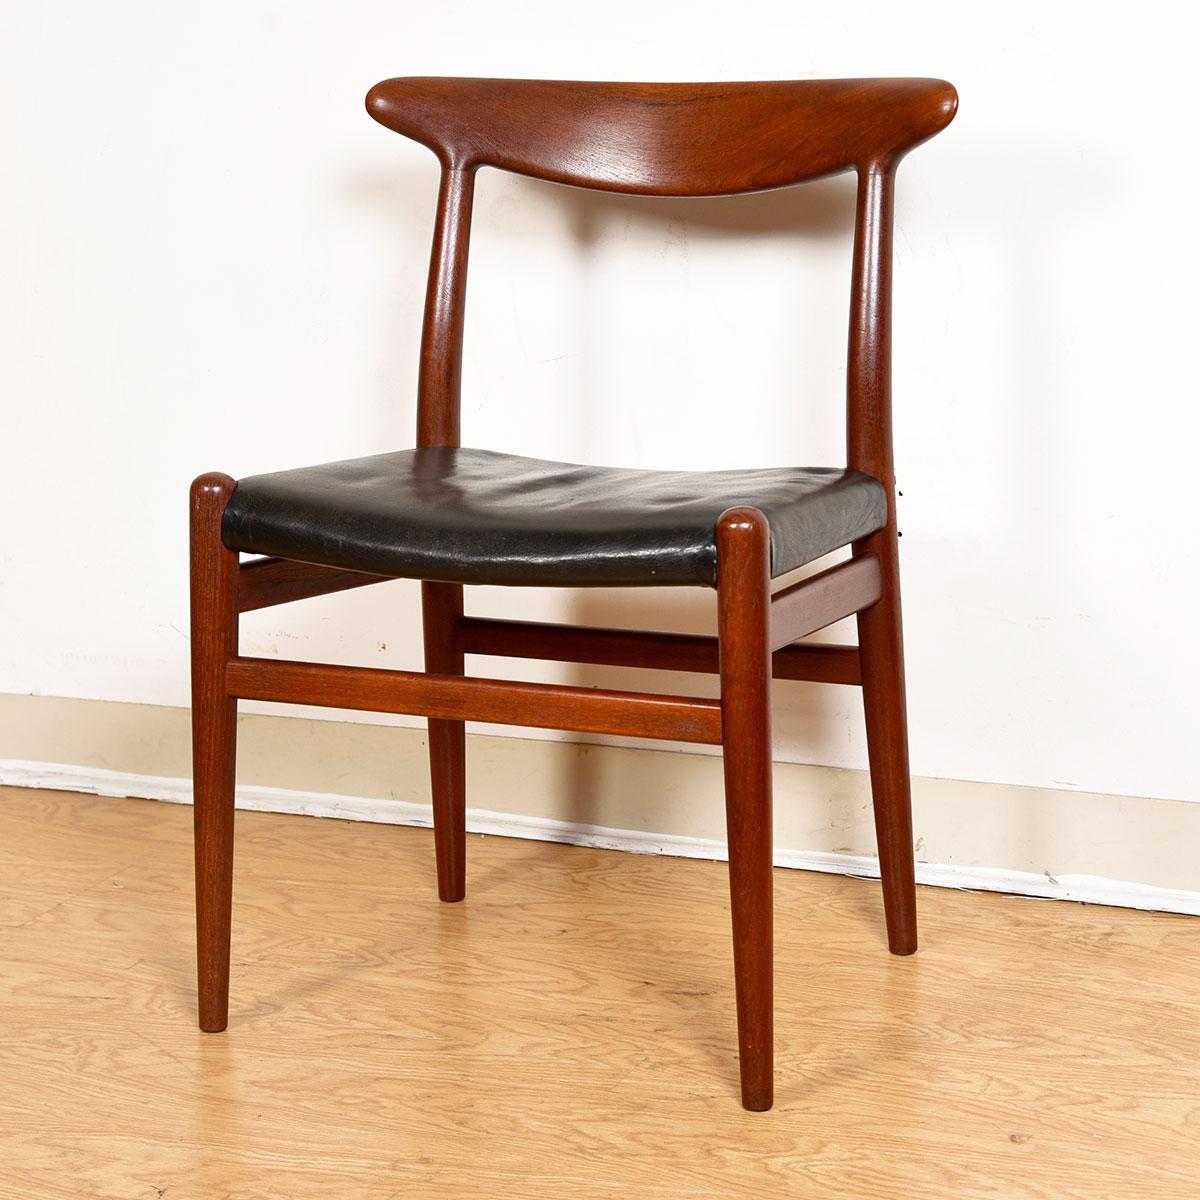 Set of 6 Danish Modern Teak with Leather W2 Dining Chairs by Hans Wegner In Good Condition For Sale In Kensington, MD